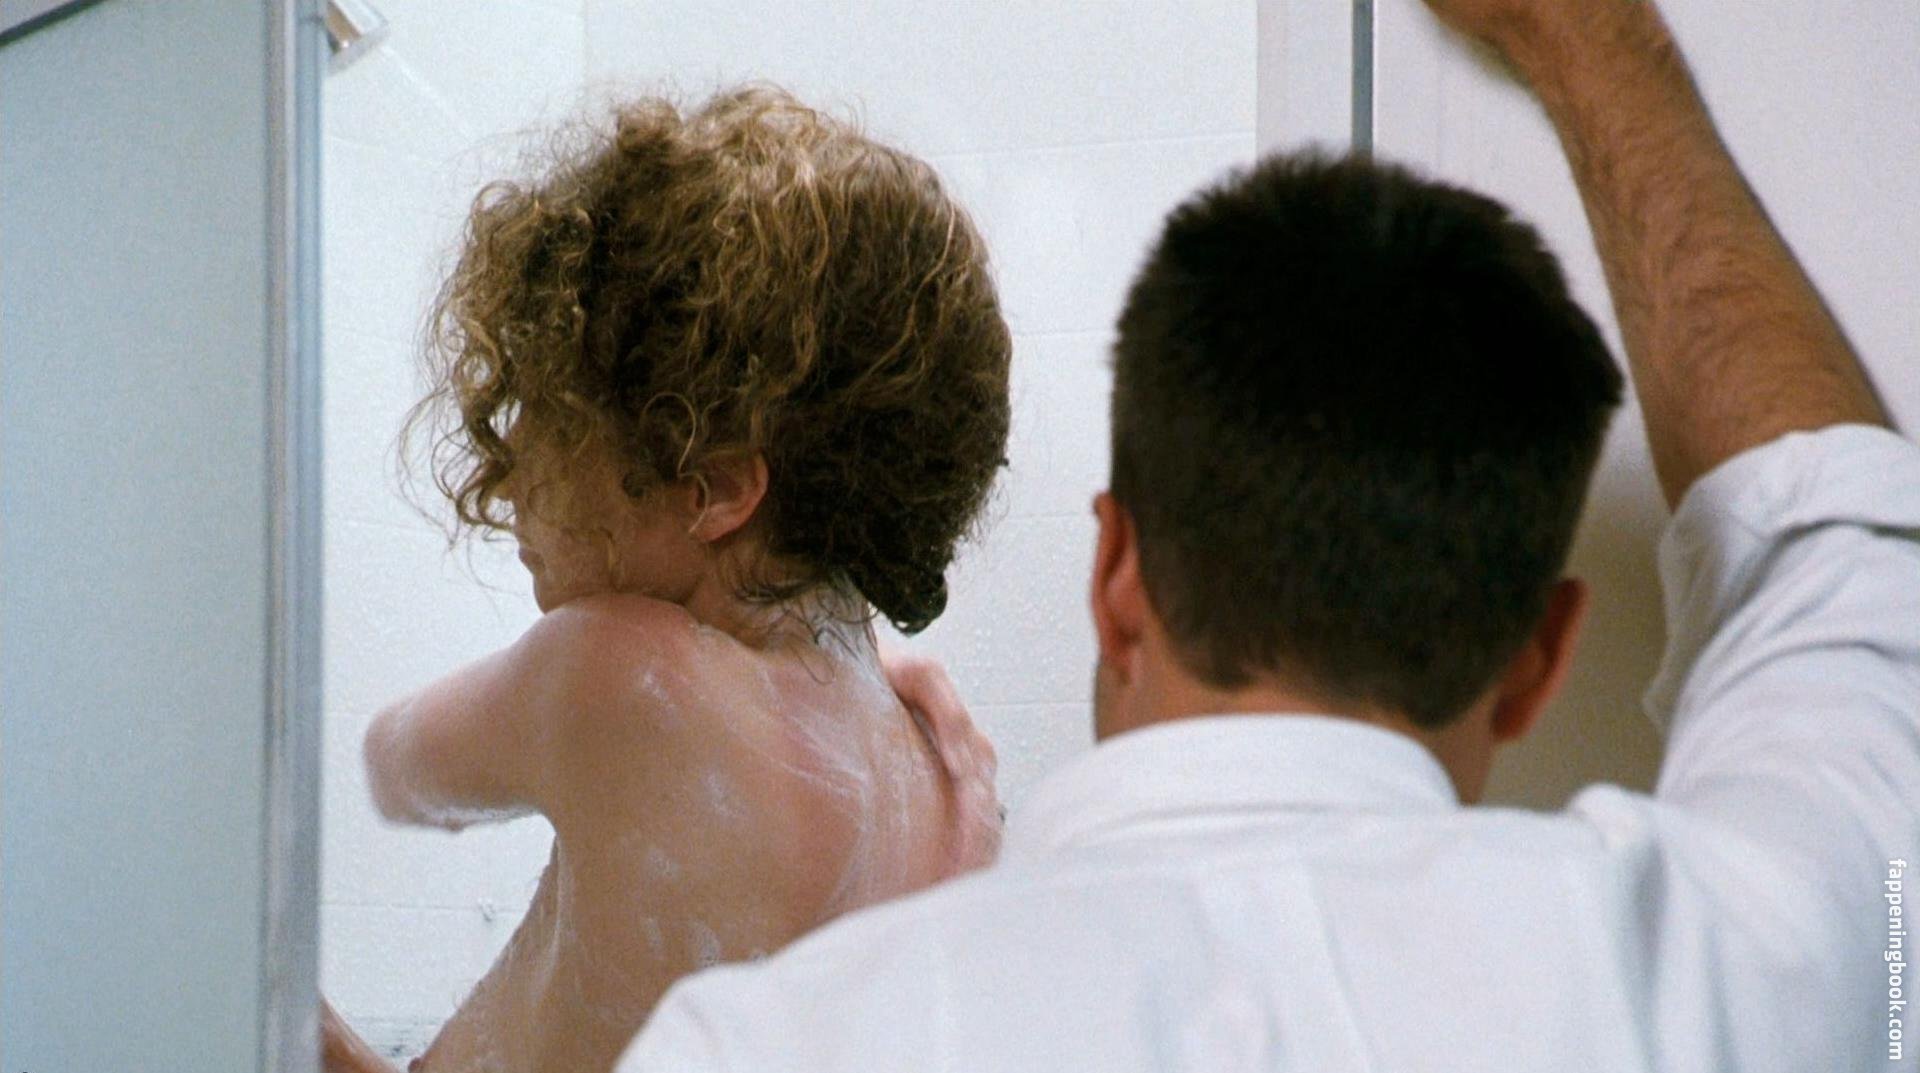 Nancy Travis Nude, The Fappening - Photo #406111 - FappeningBook.